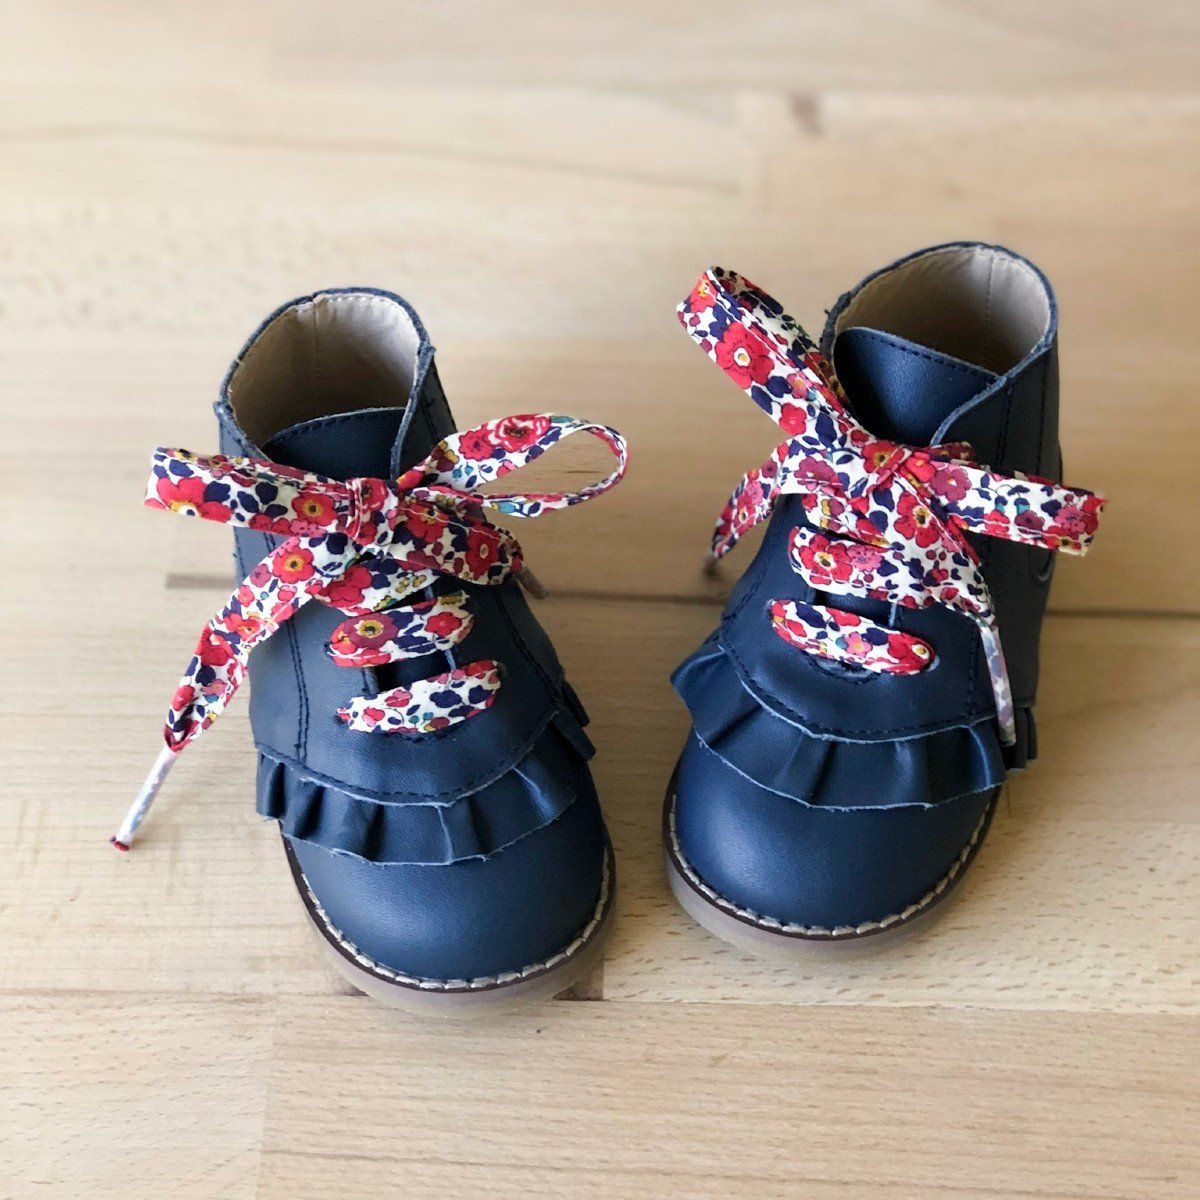 Girls navy boots with red floral shoelaces